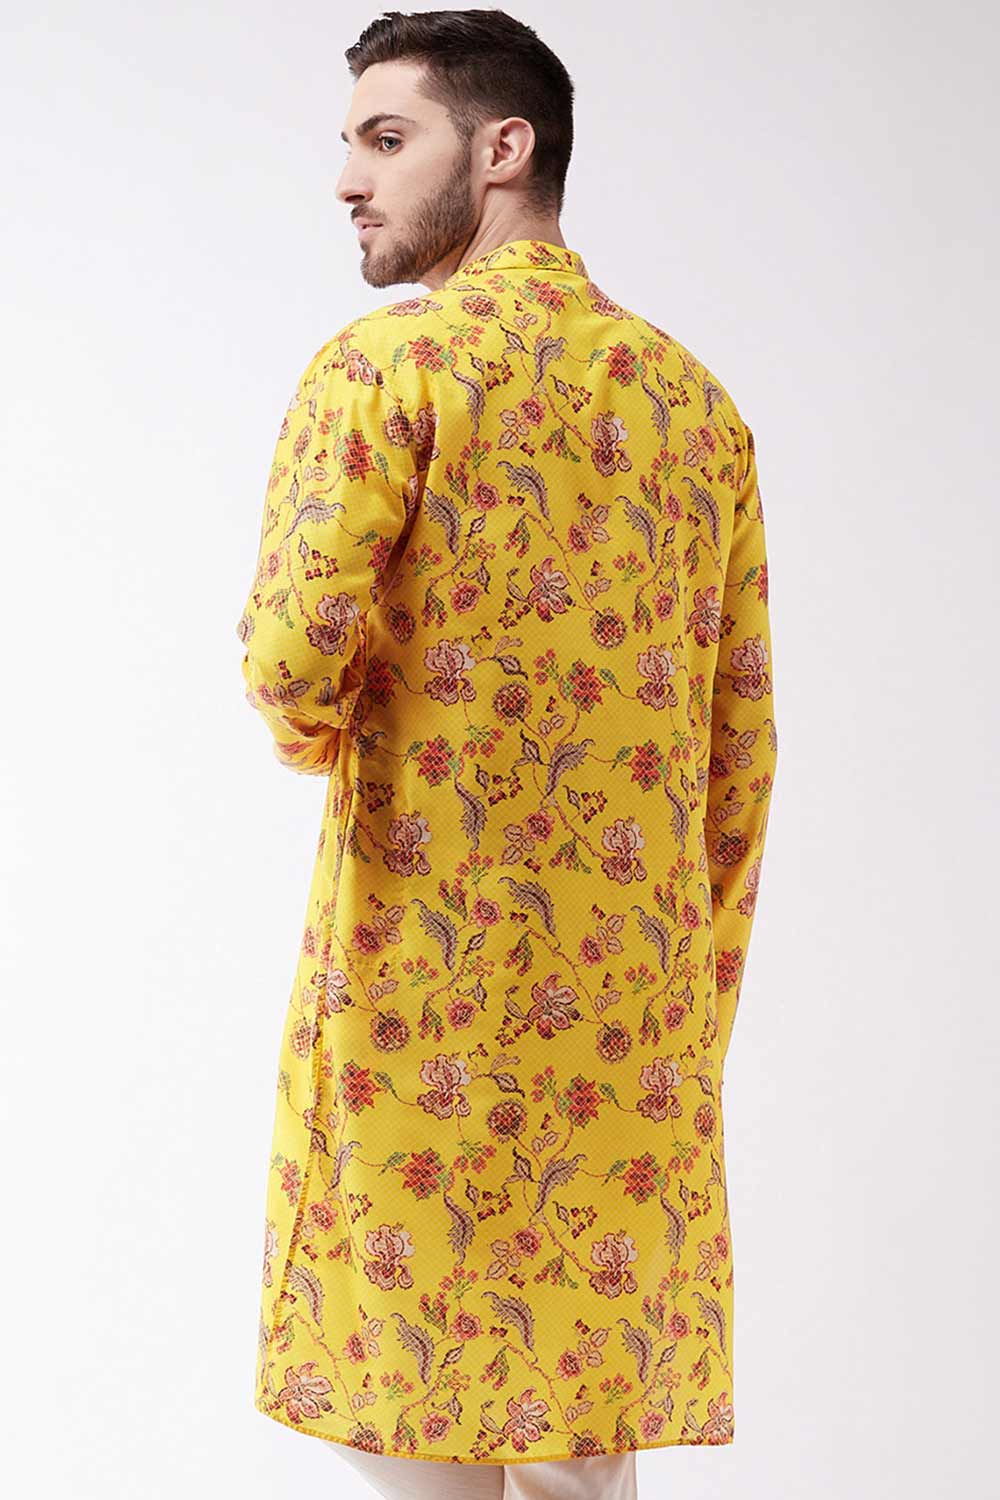 Floral Print Yellow Kurta for Cocktail Wear